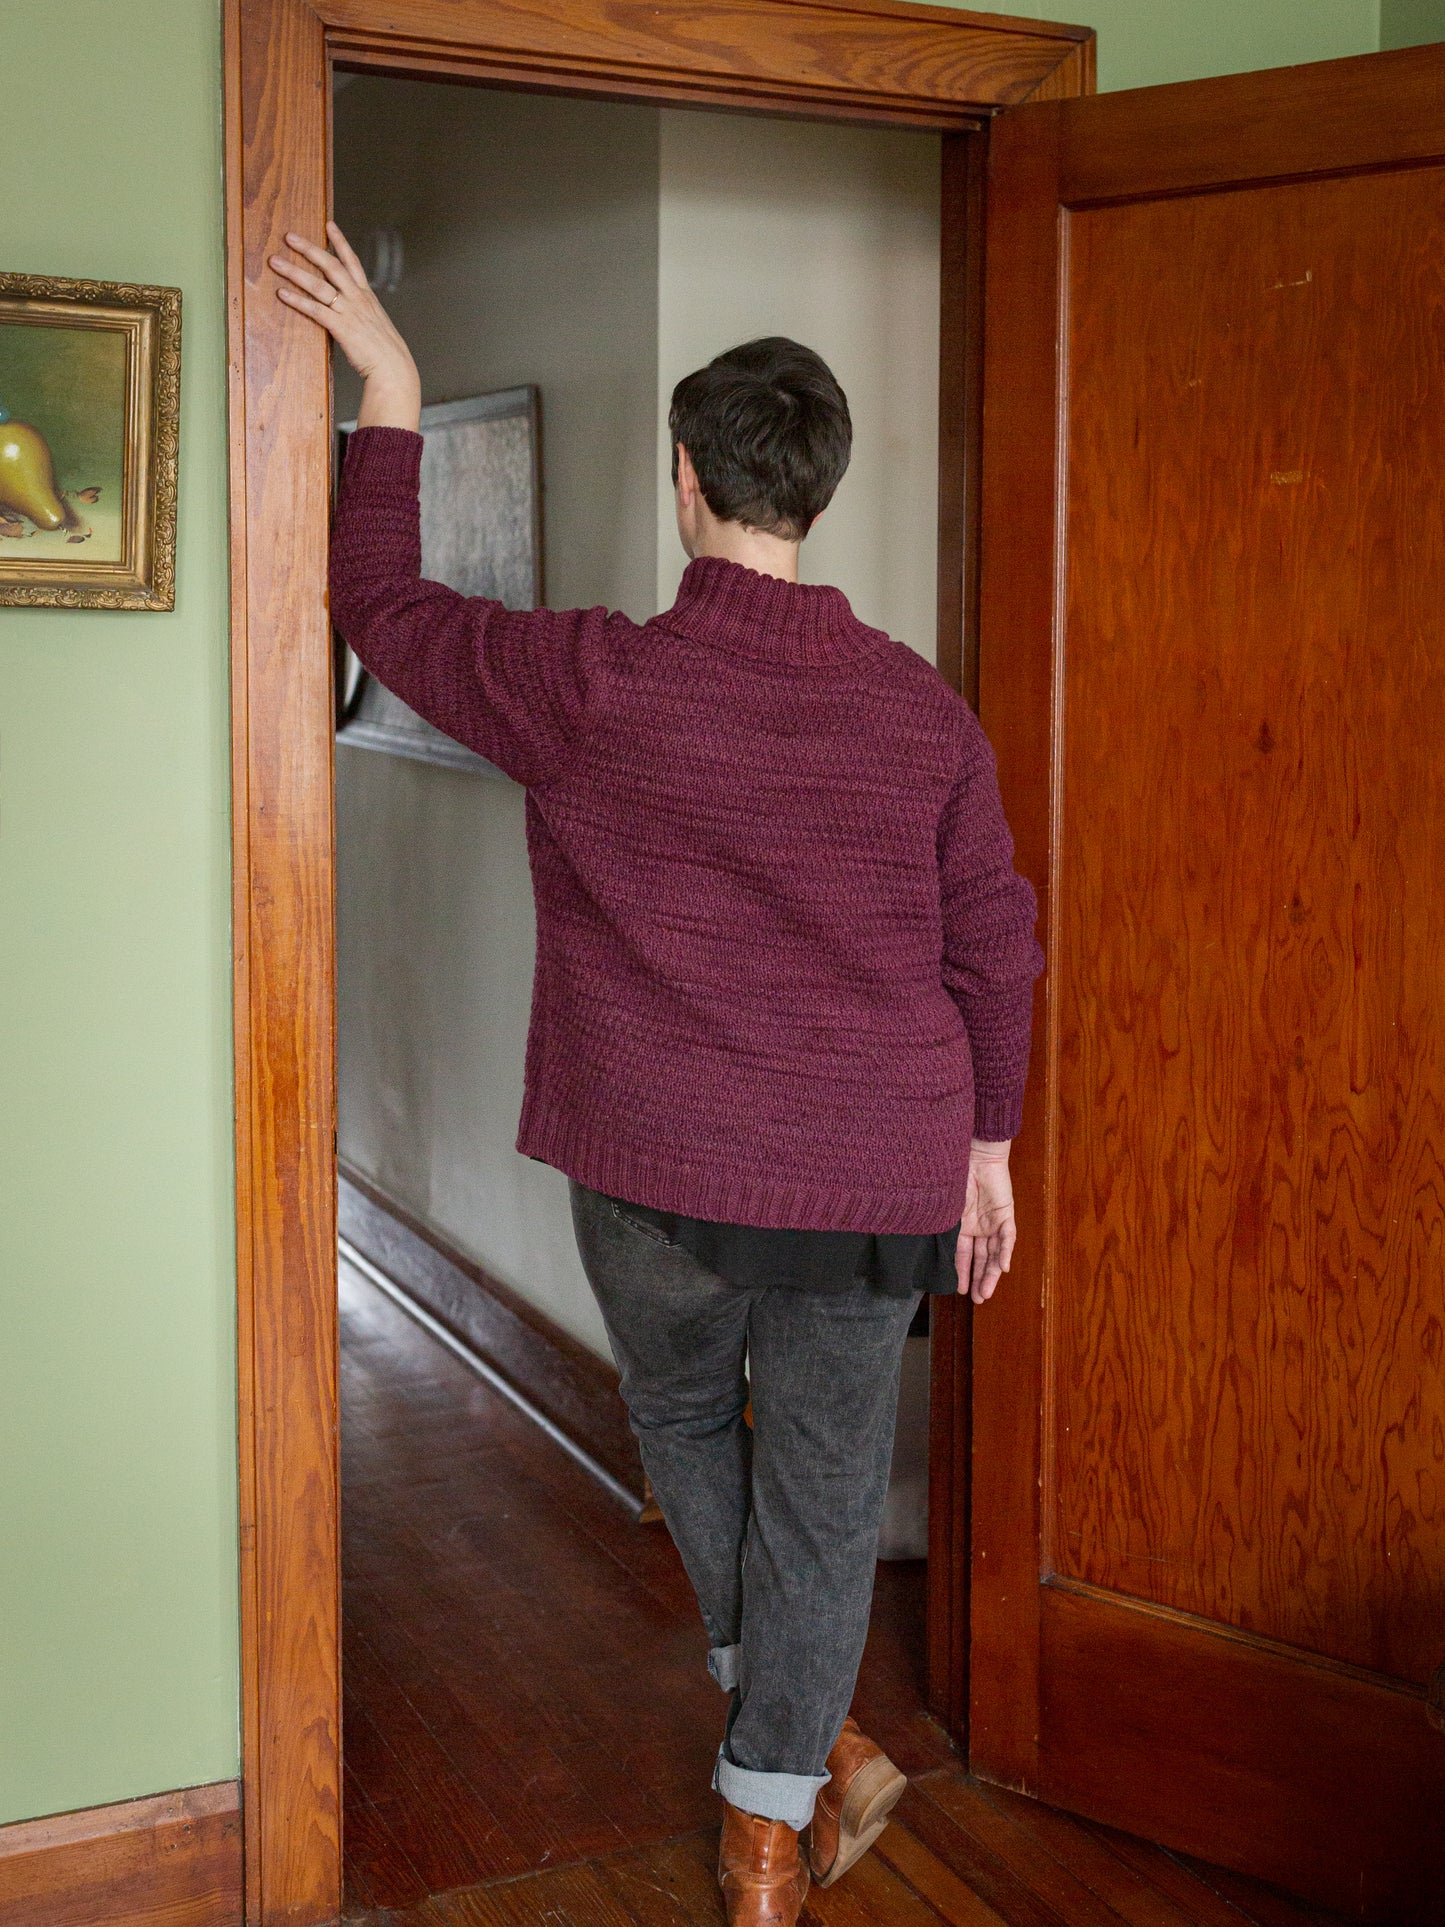 Seen from behind, Jen stands in a doorway, one arm raised to show off the structured, hand knit cardigan she wears with grey jeans and brown boots.